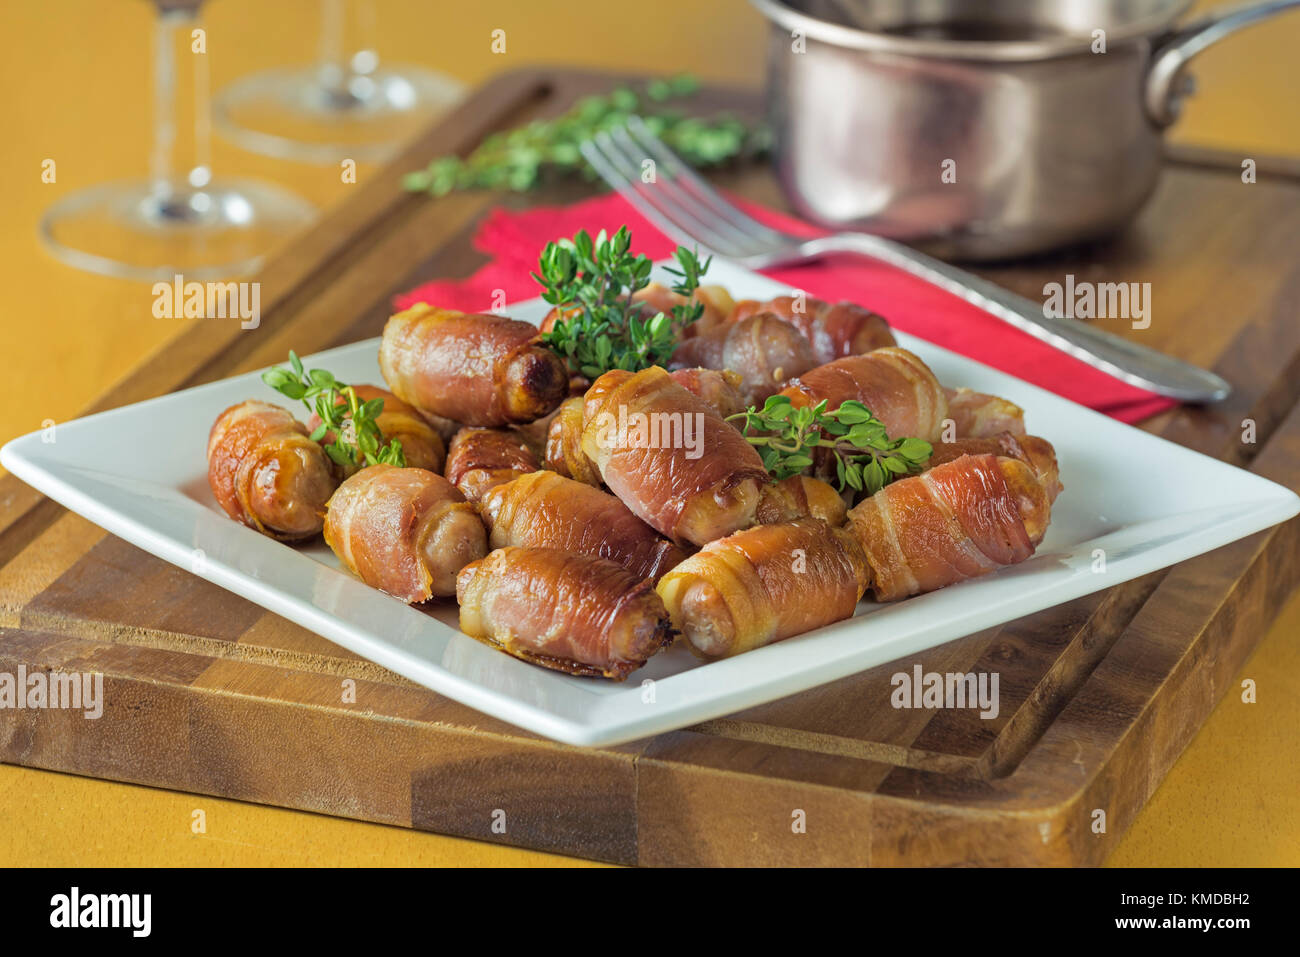 Pigs in blankets.Sausage and bacon rolls. UK Food Stock Photo